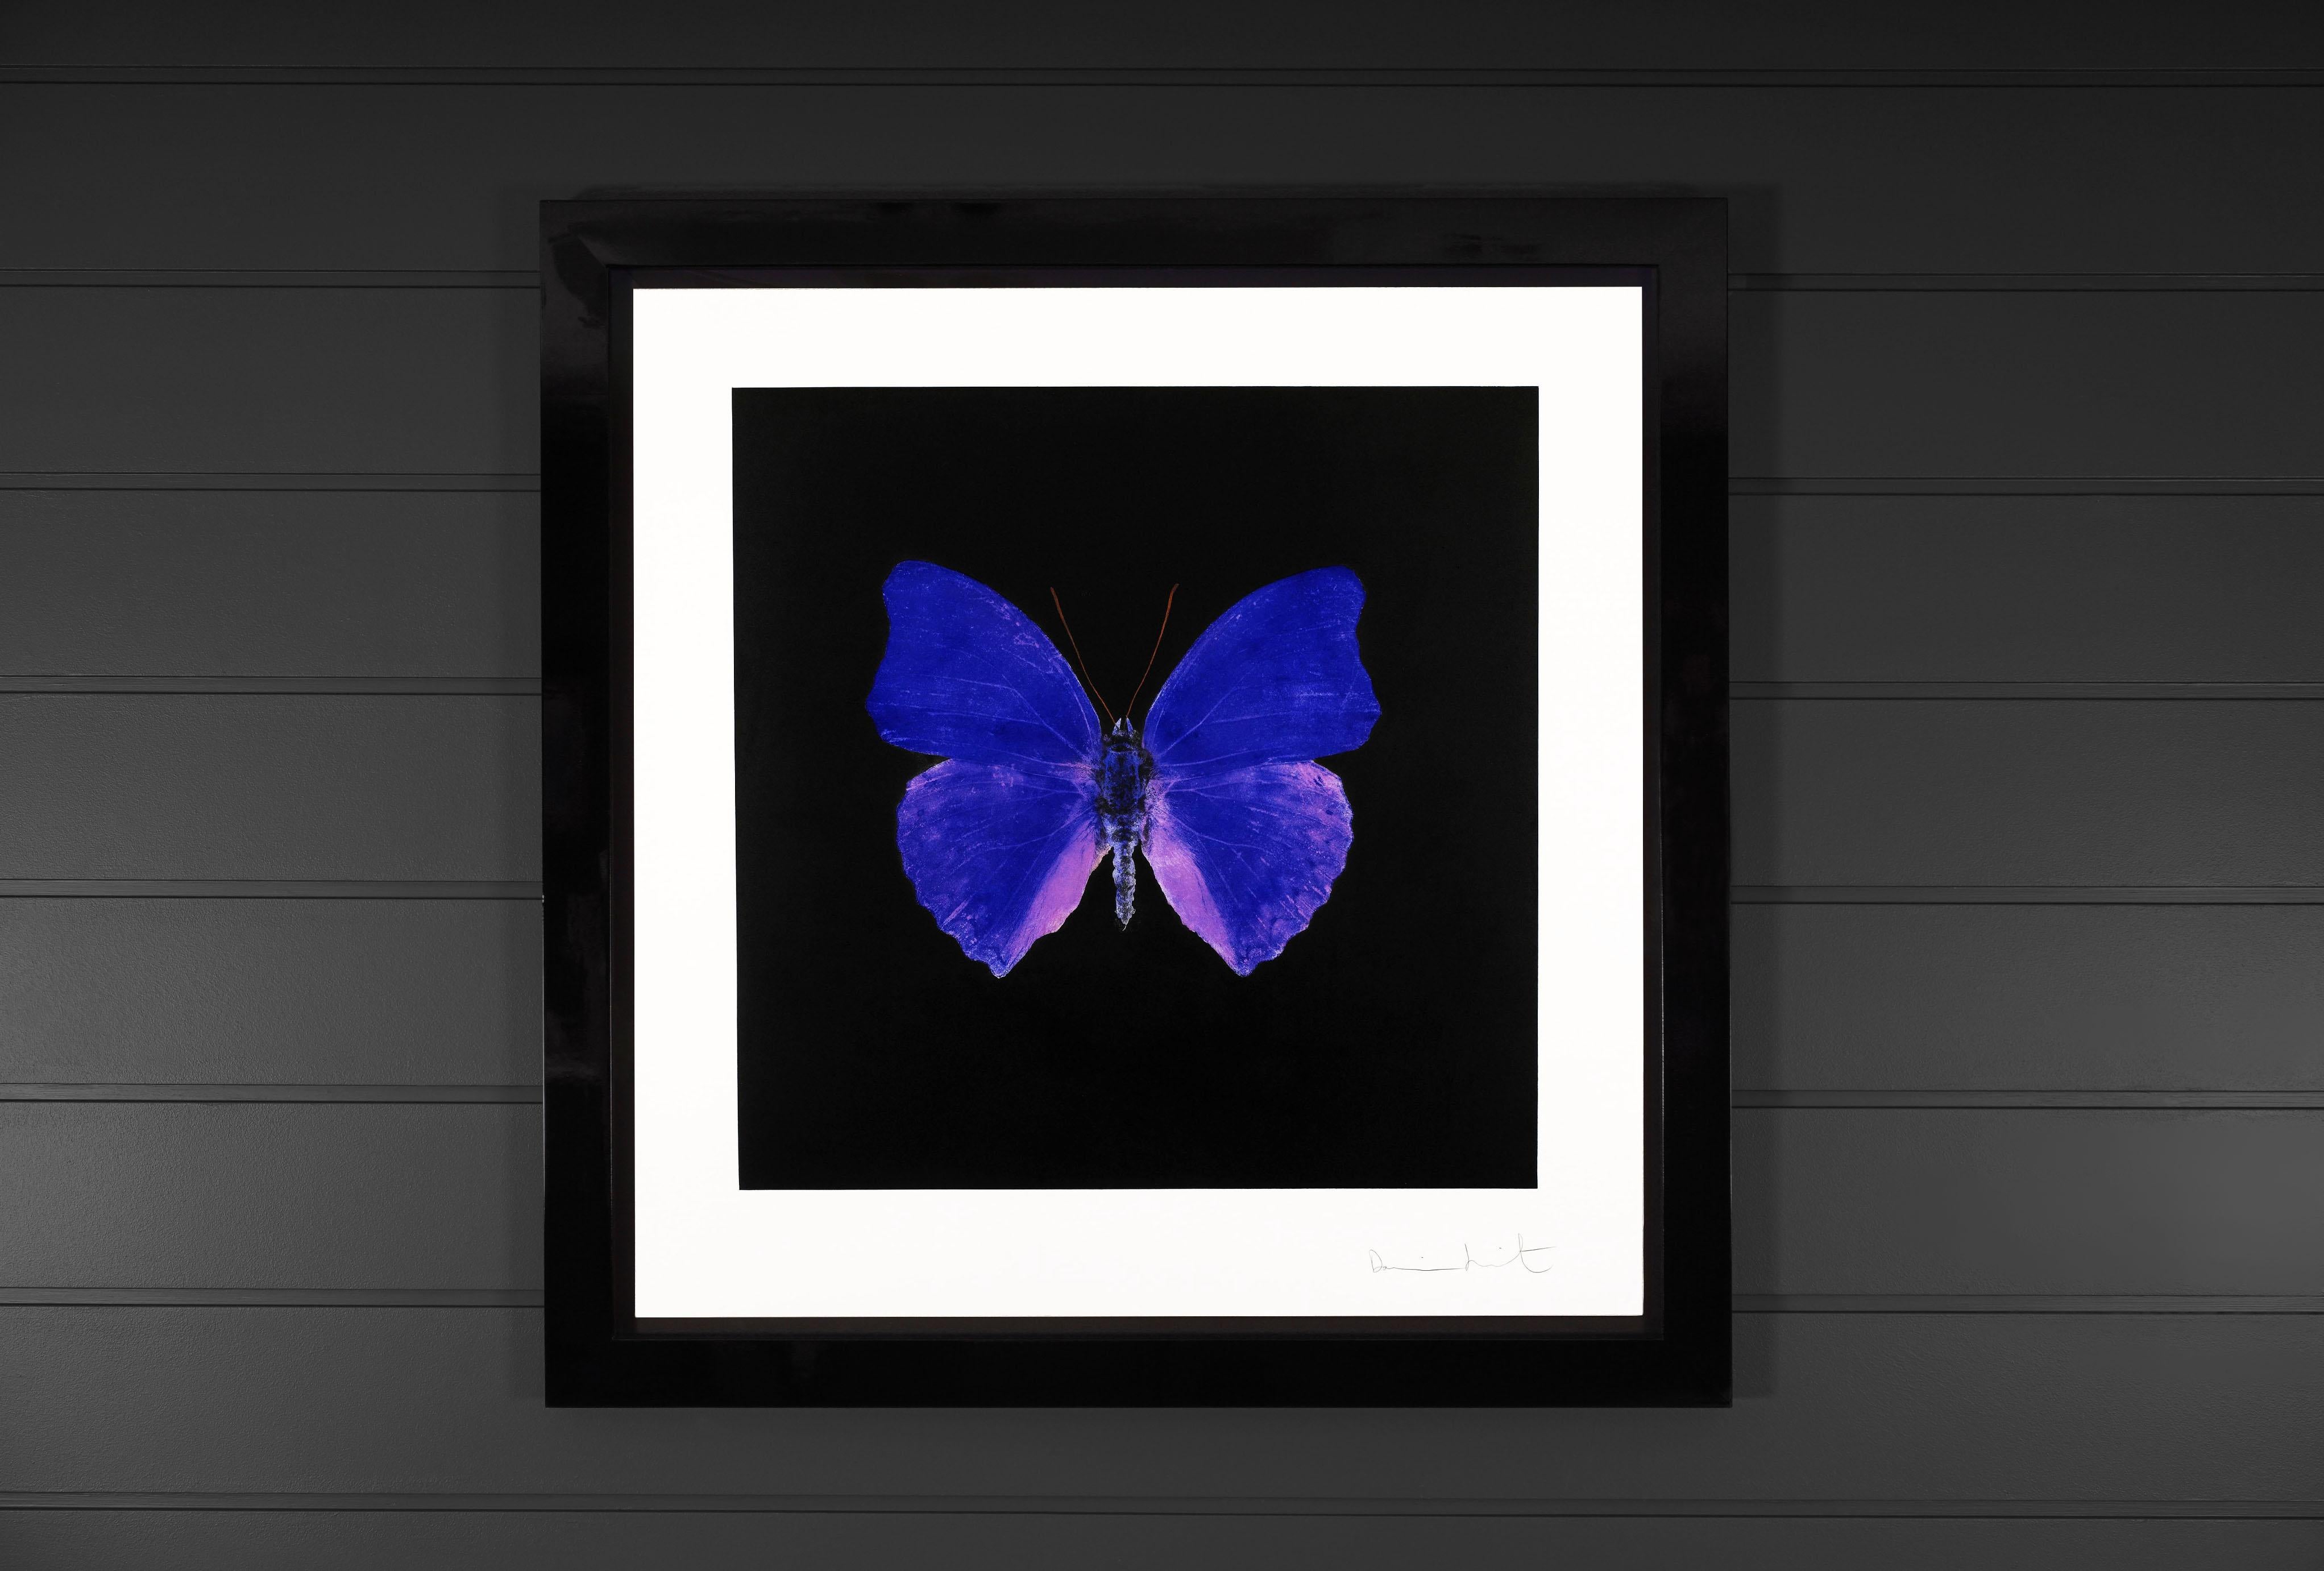 Damien Hirst, Butterfly Souls Etching, Cobalt, 2007 1